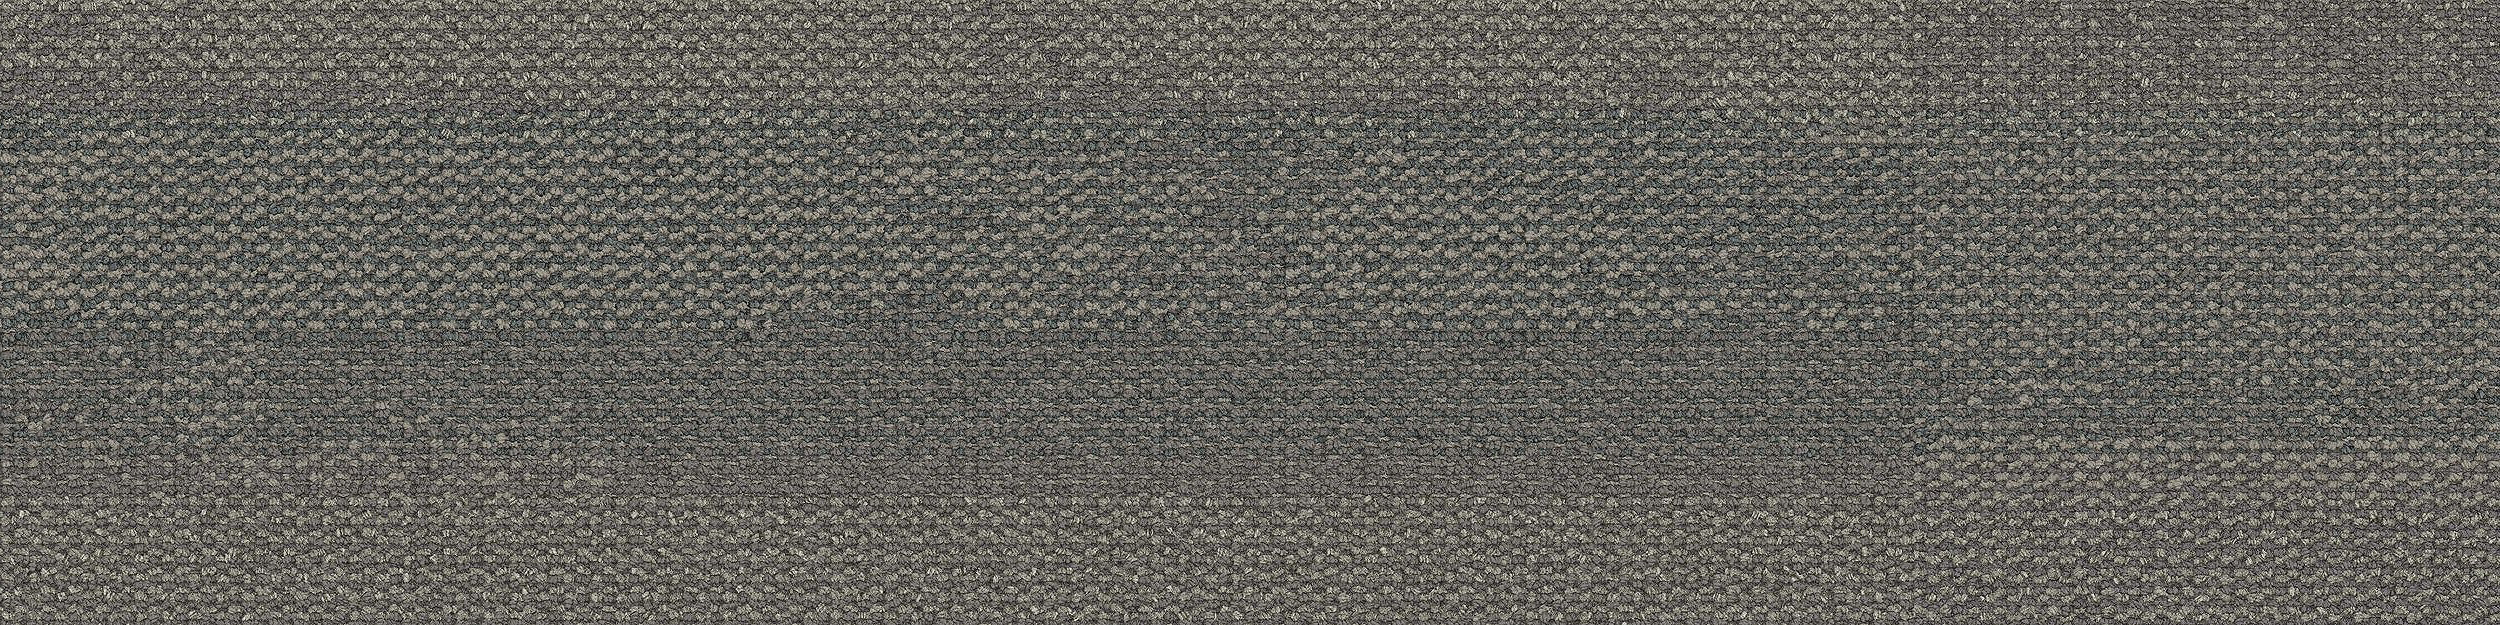 Naturally Weathered Carpet Tile In Greystone image number 10